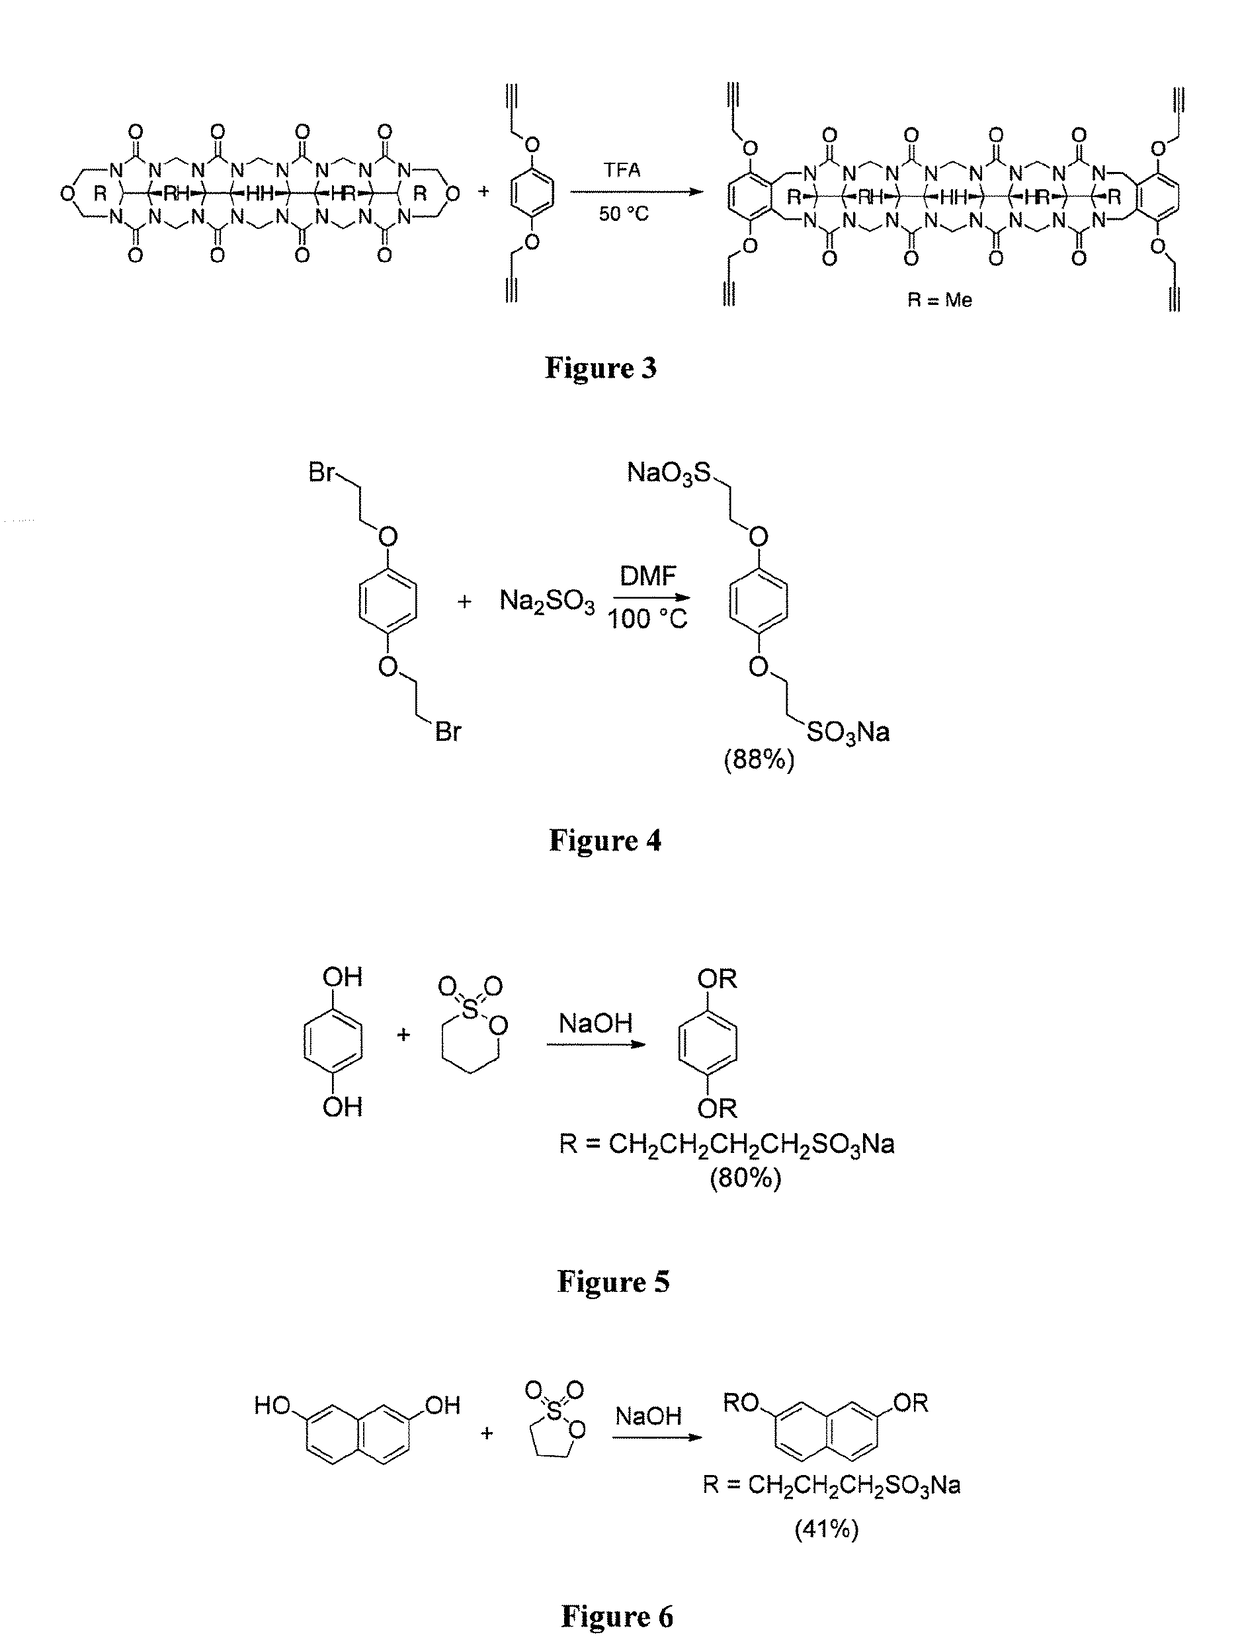 Acyclic cucurbit[n]uril type molecular containers to treat intoxication and decrease relapse rate in substance abuse disorders